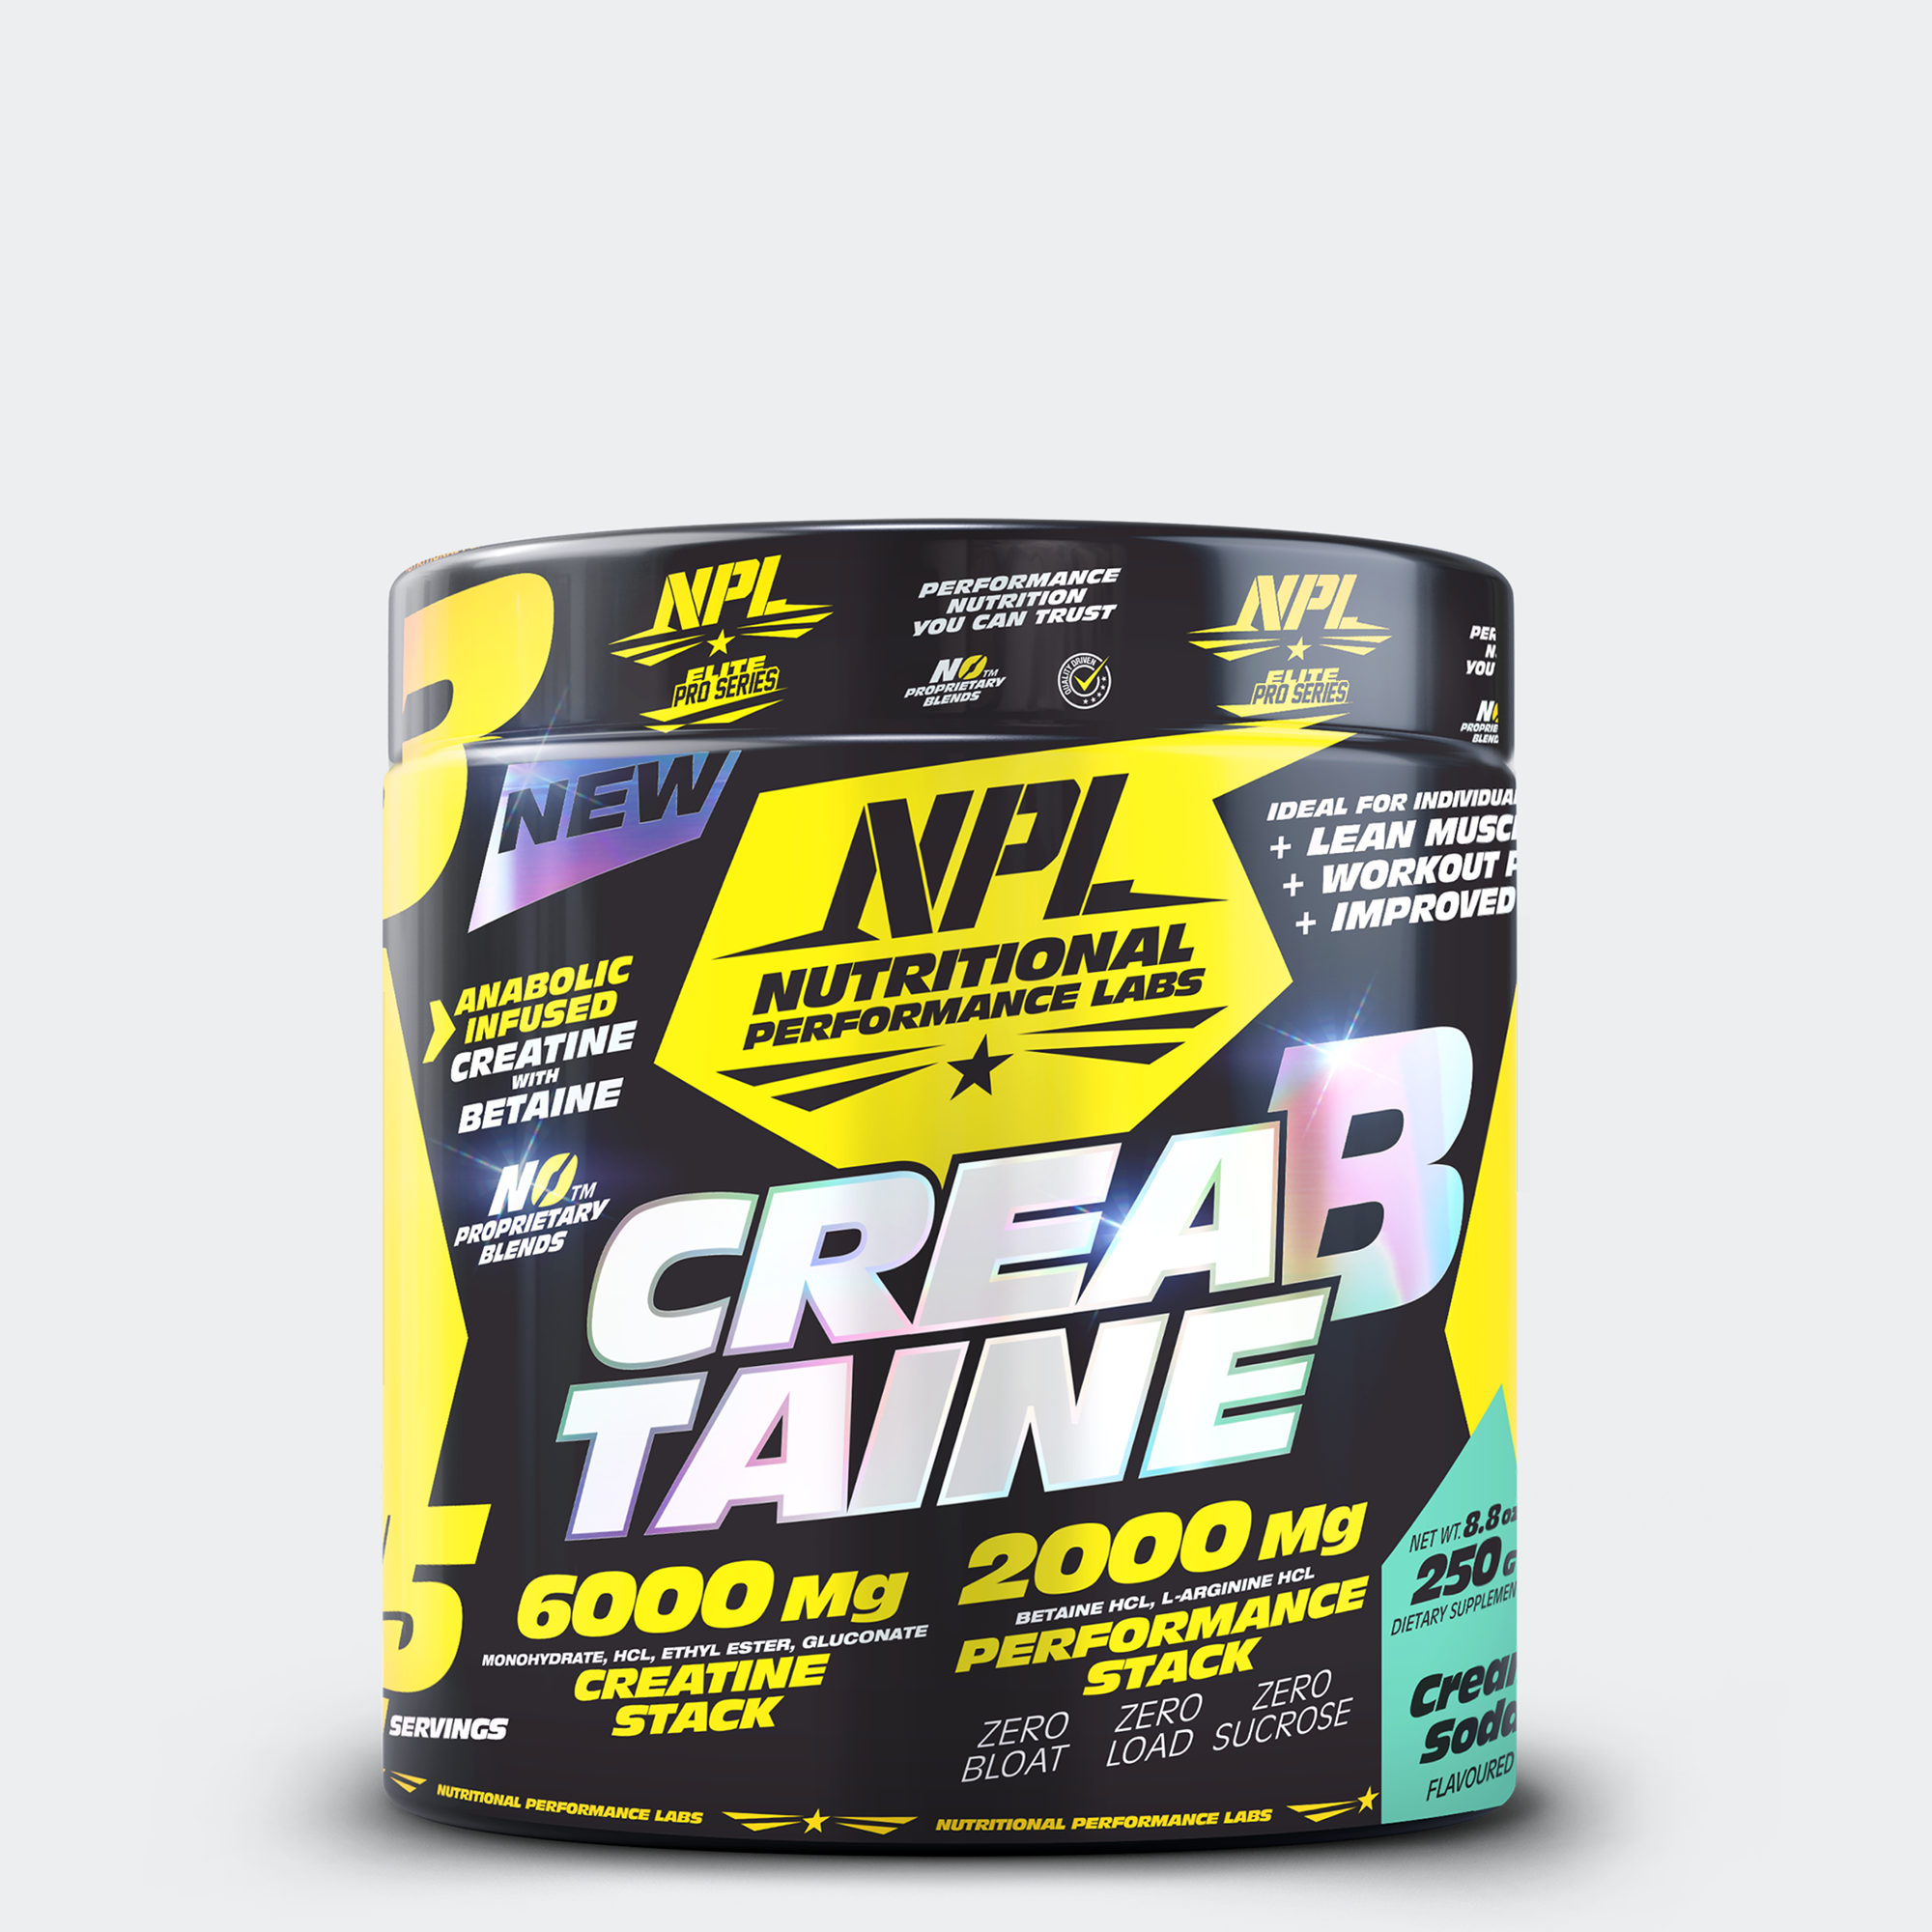 NPL CREA-B-TAINE: Unleash Strength and Lean Muscle Support